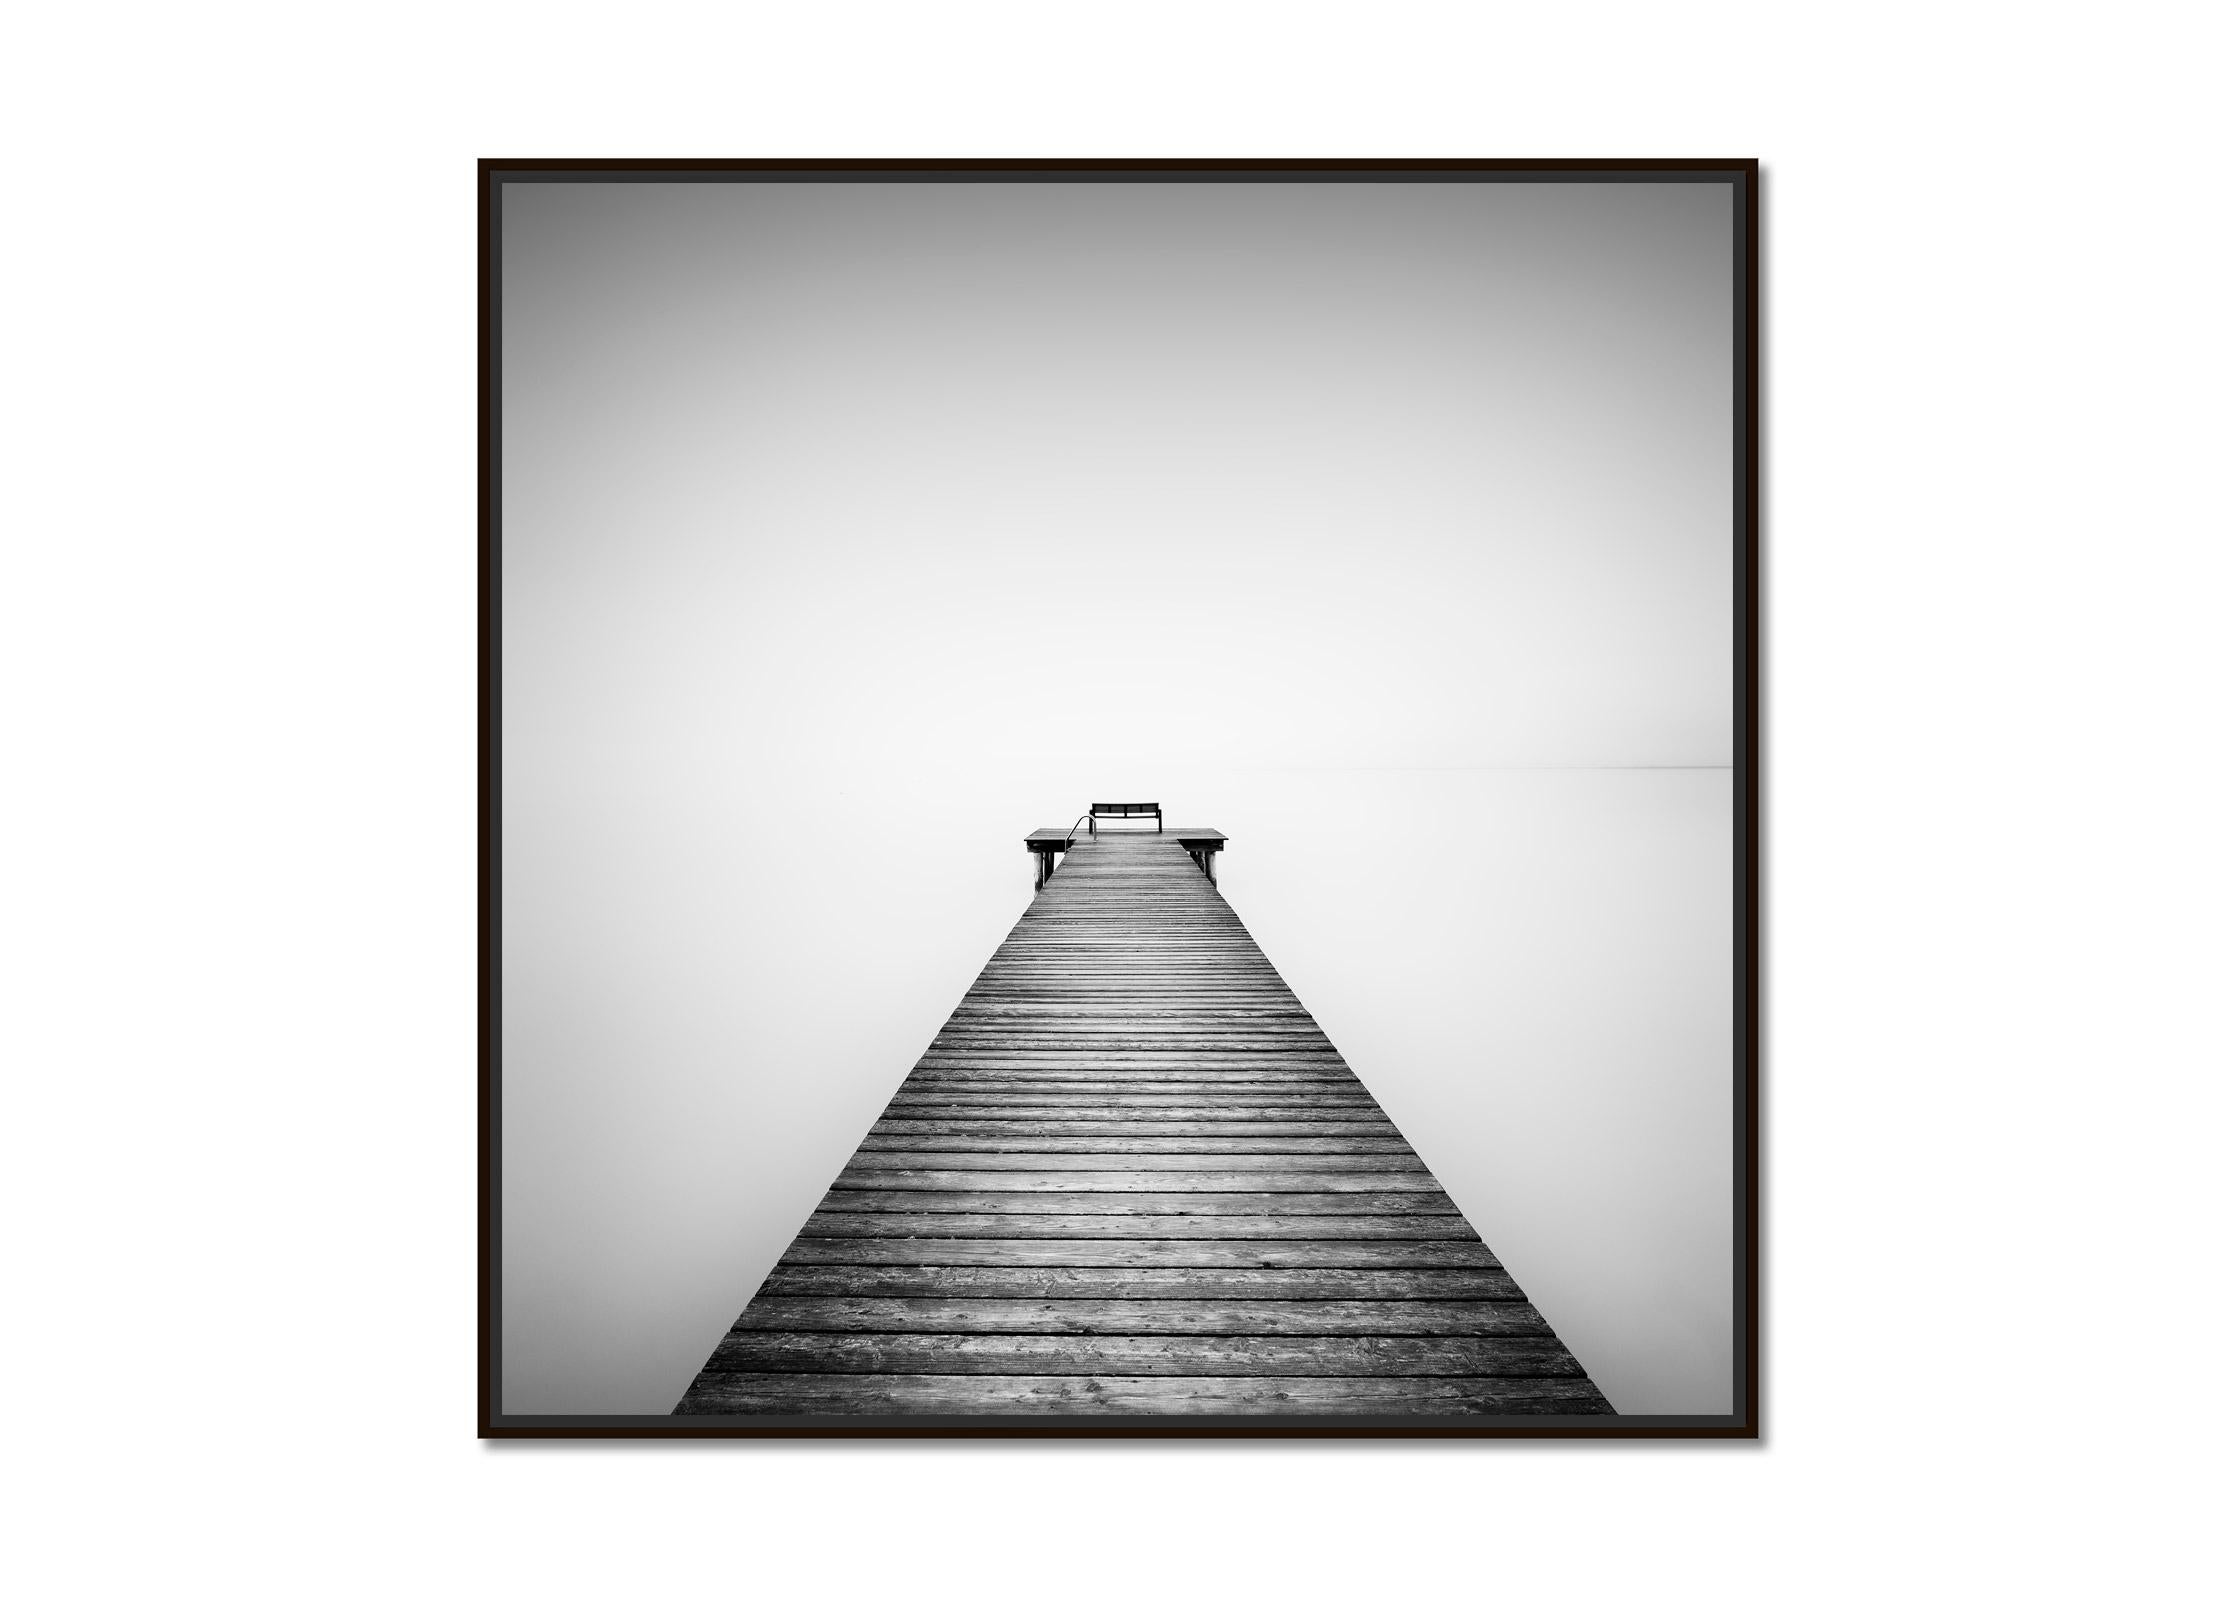 Misty Morning at the Lake, black and white long exposure landscape photography - Photograph by Gerald Berghammer